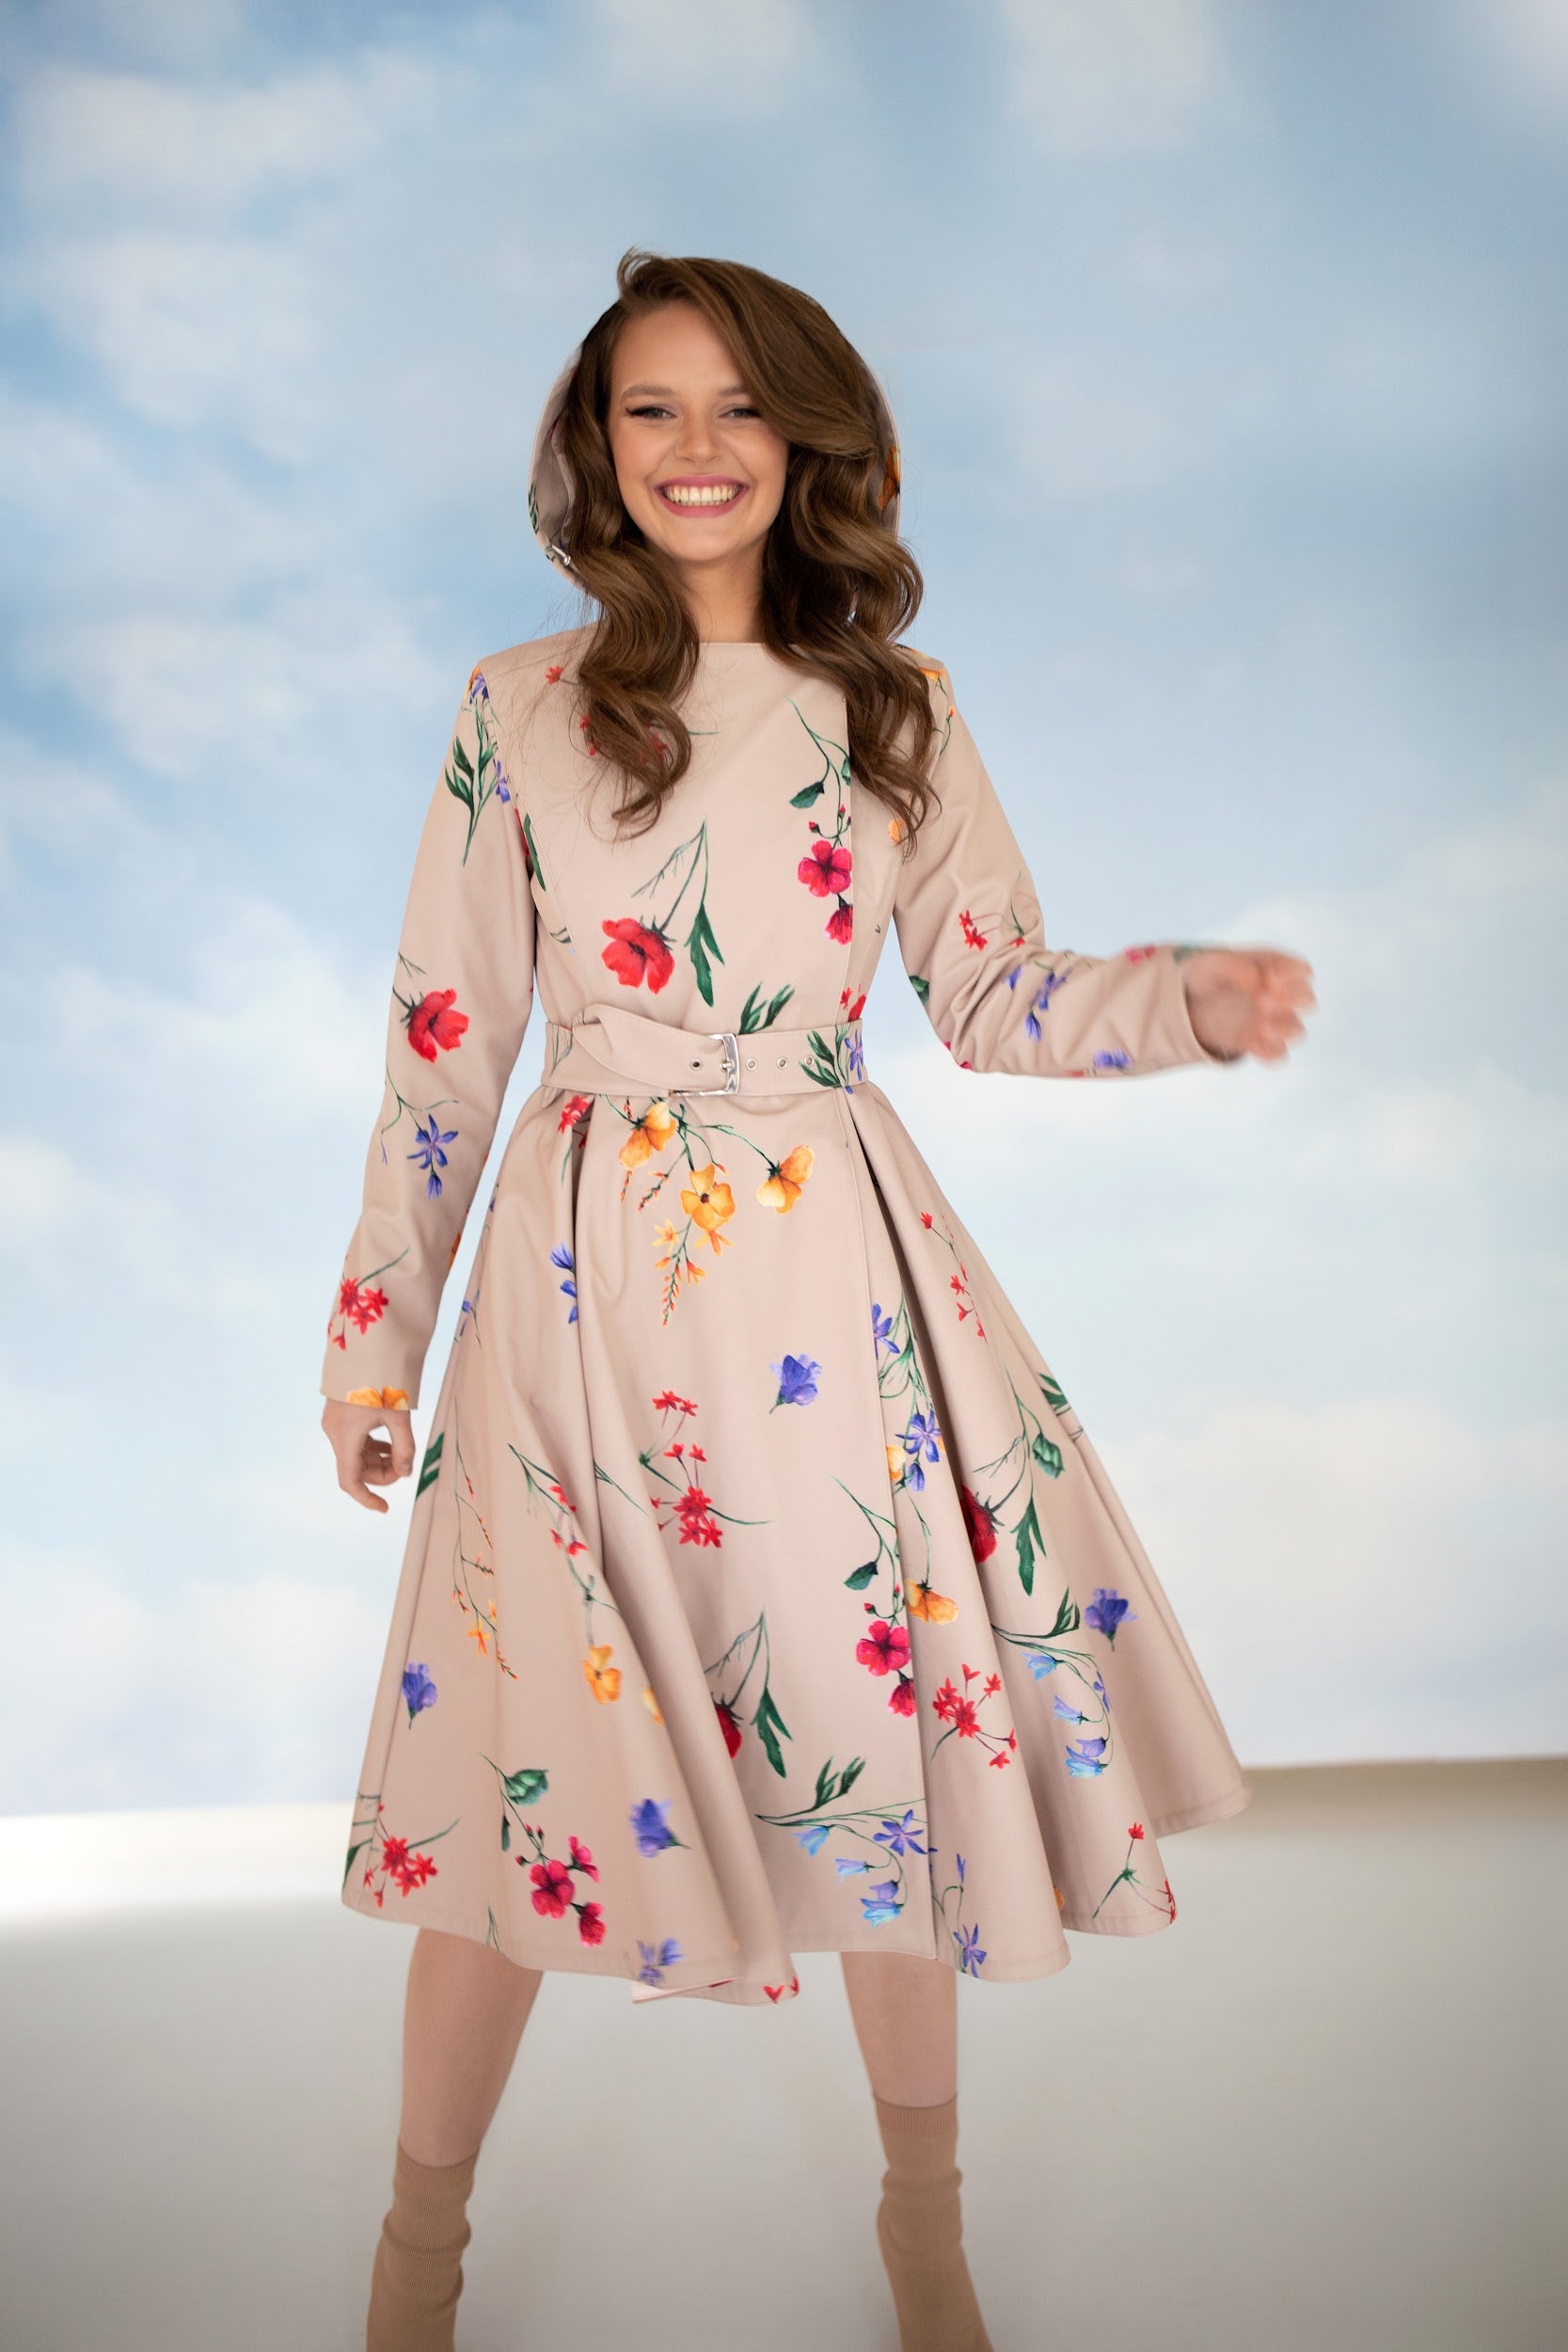 Beige Design Coat with Colorful Flower Print and Belt – RainSisters